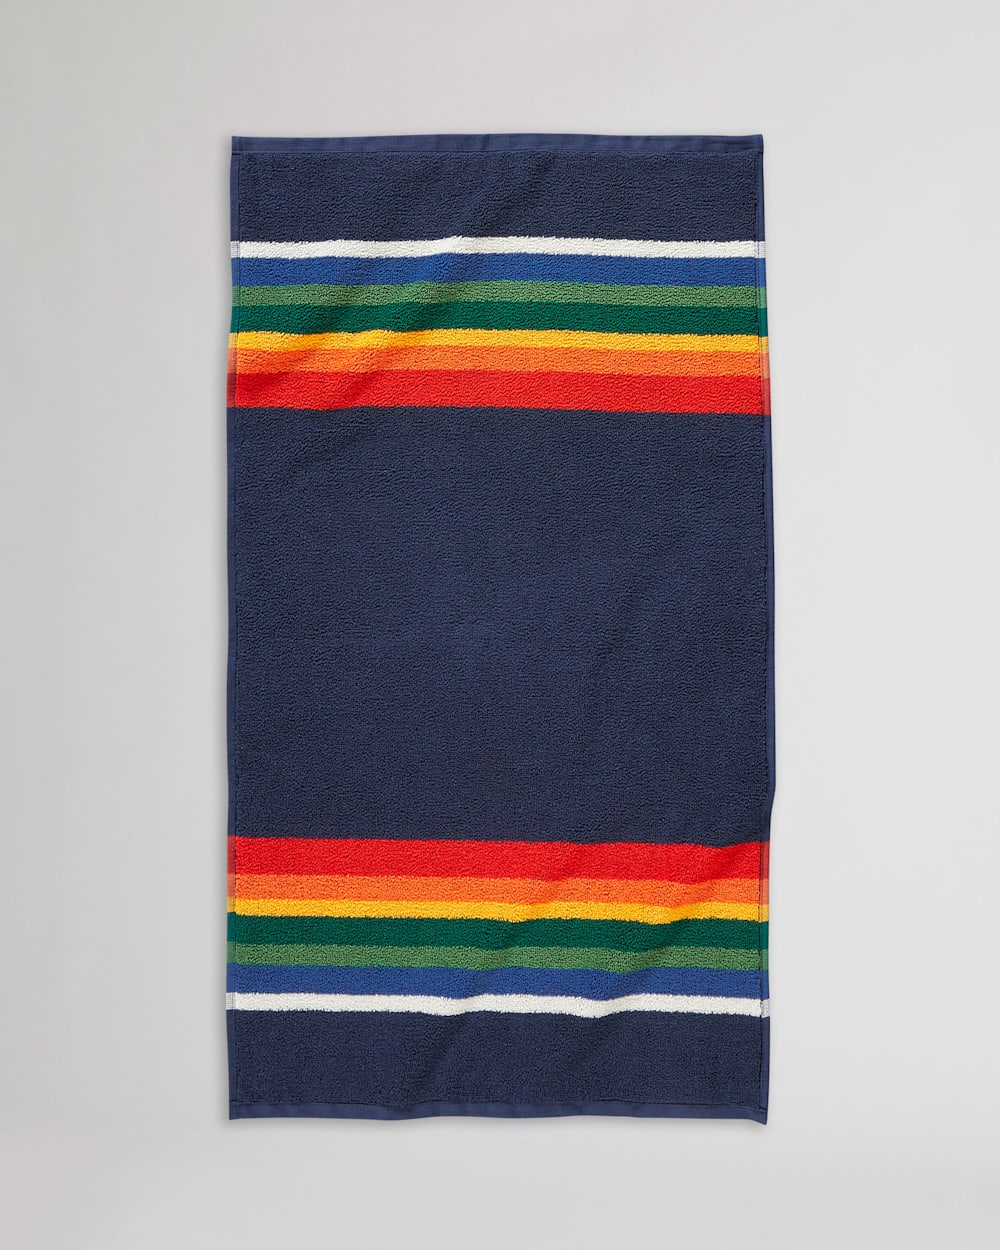 ALTERNATE VIEW OF CRATER LAKE NATIONAL PARK TOWEL SET IN NAVY image number 4